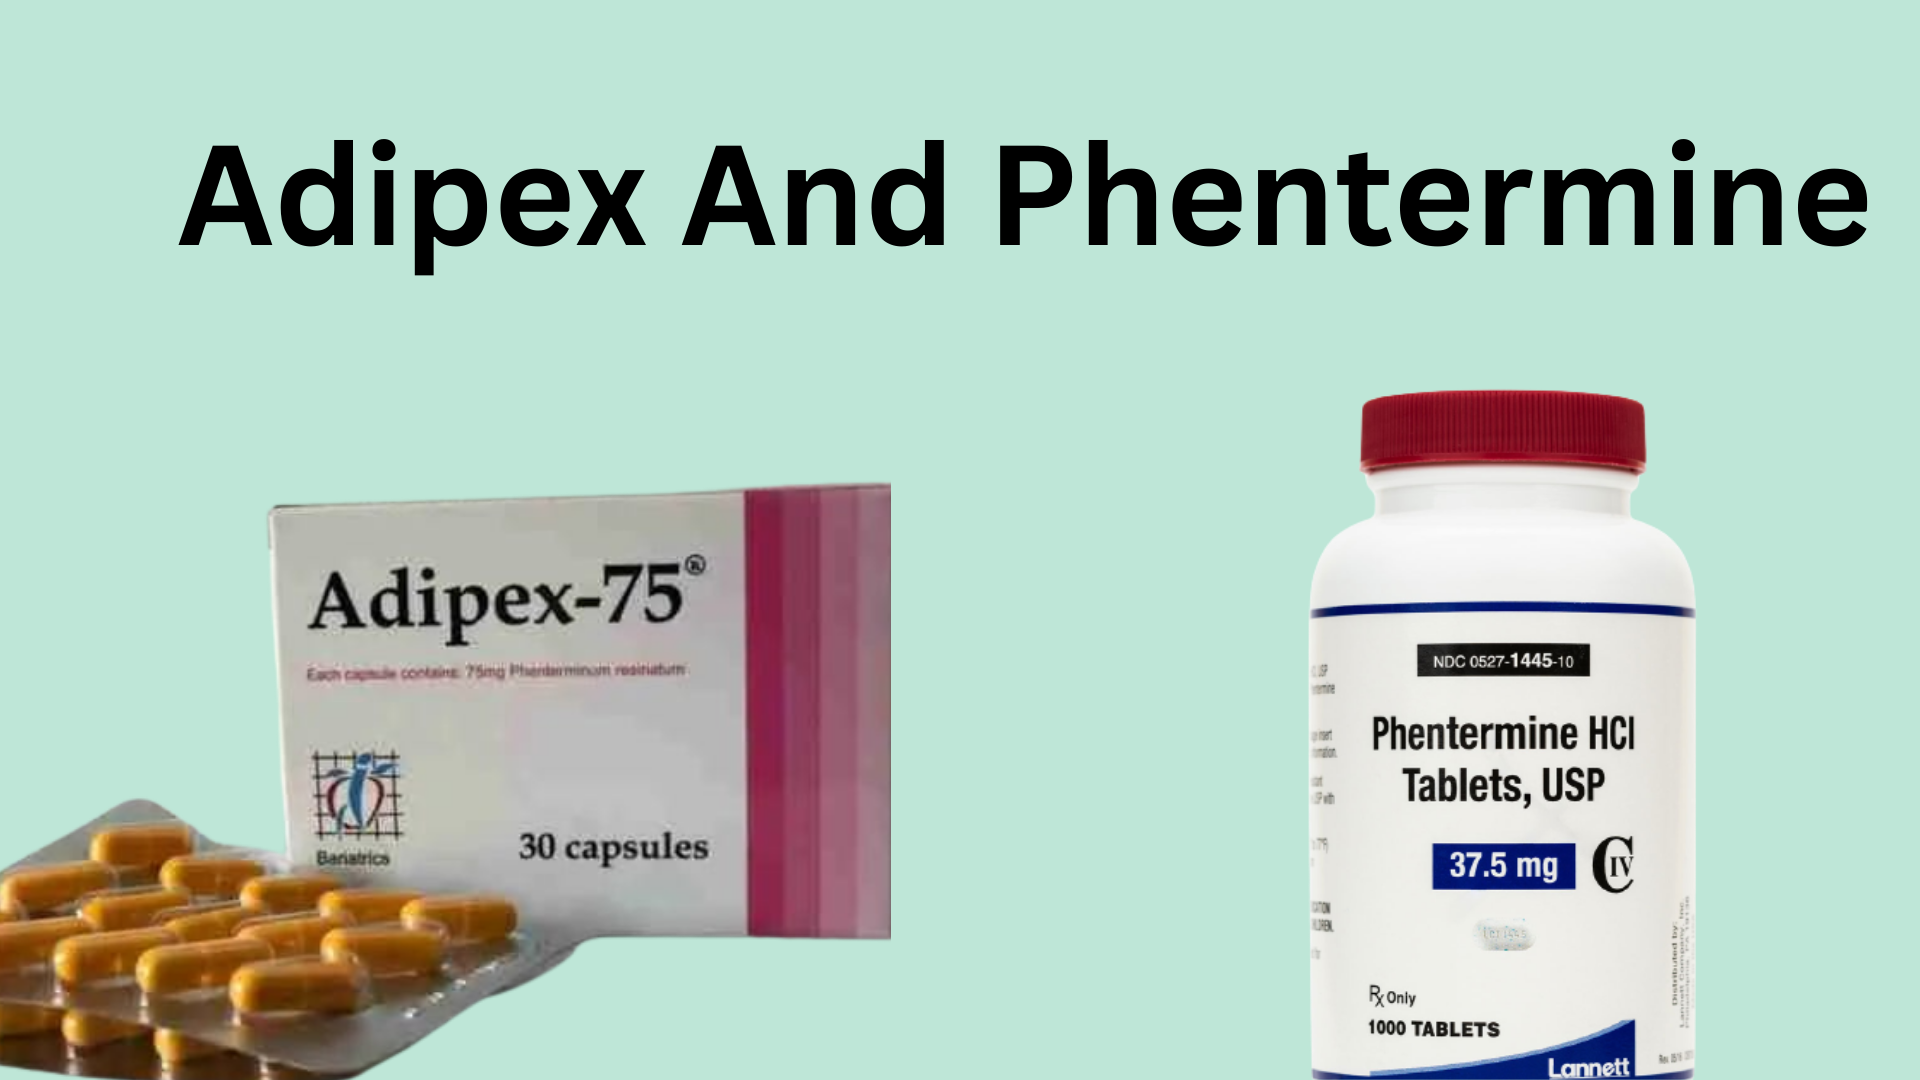 Adipex And Phentermine: How are they Different? 16